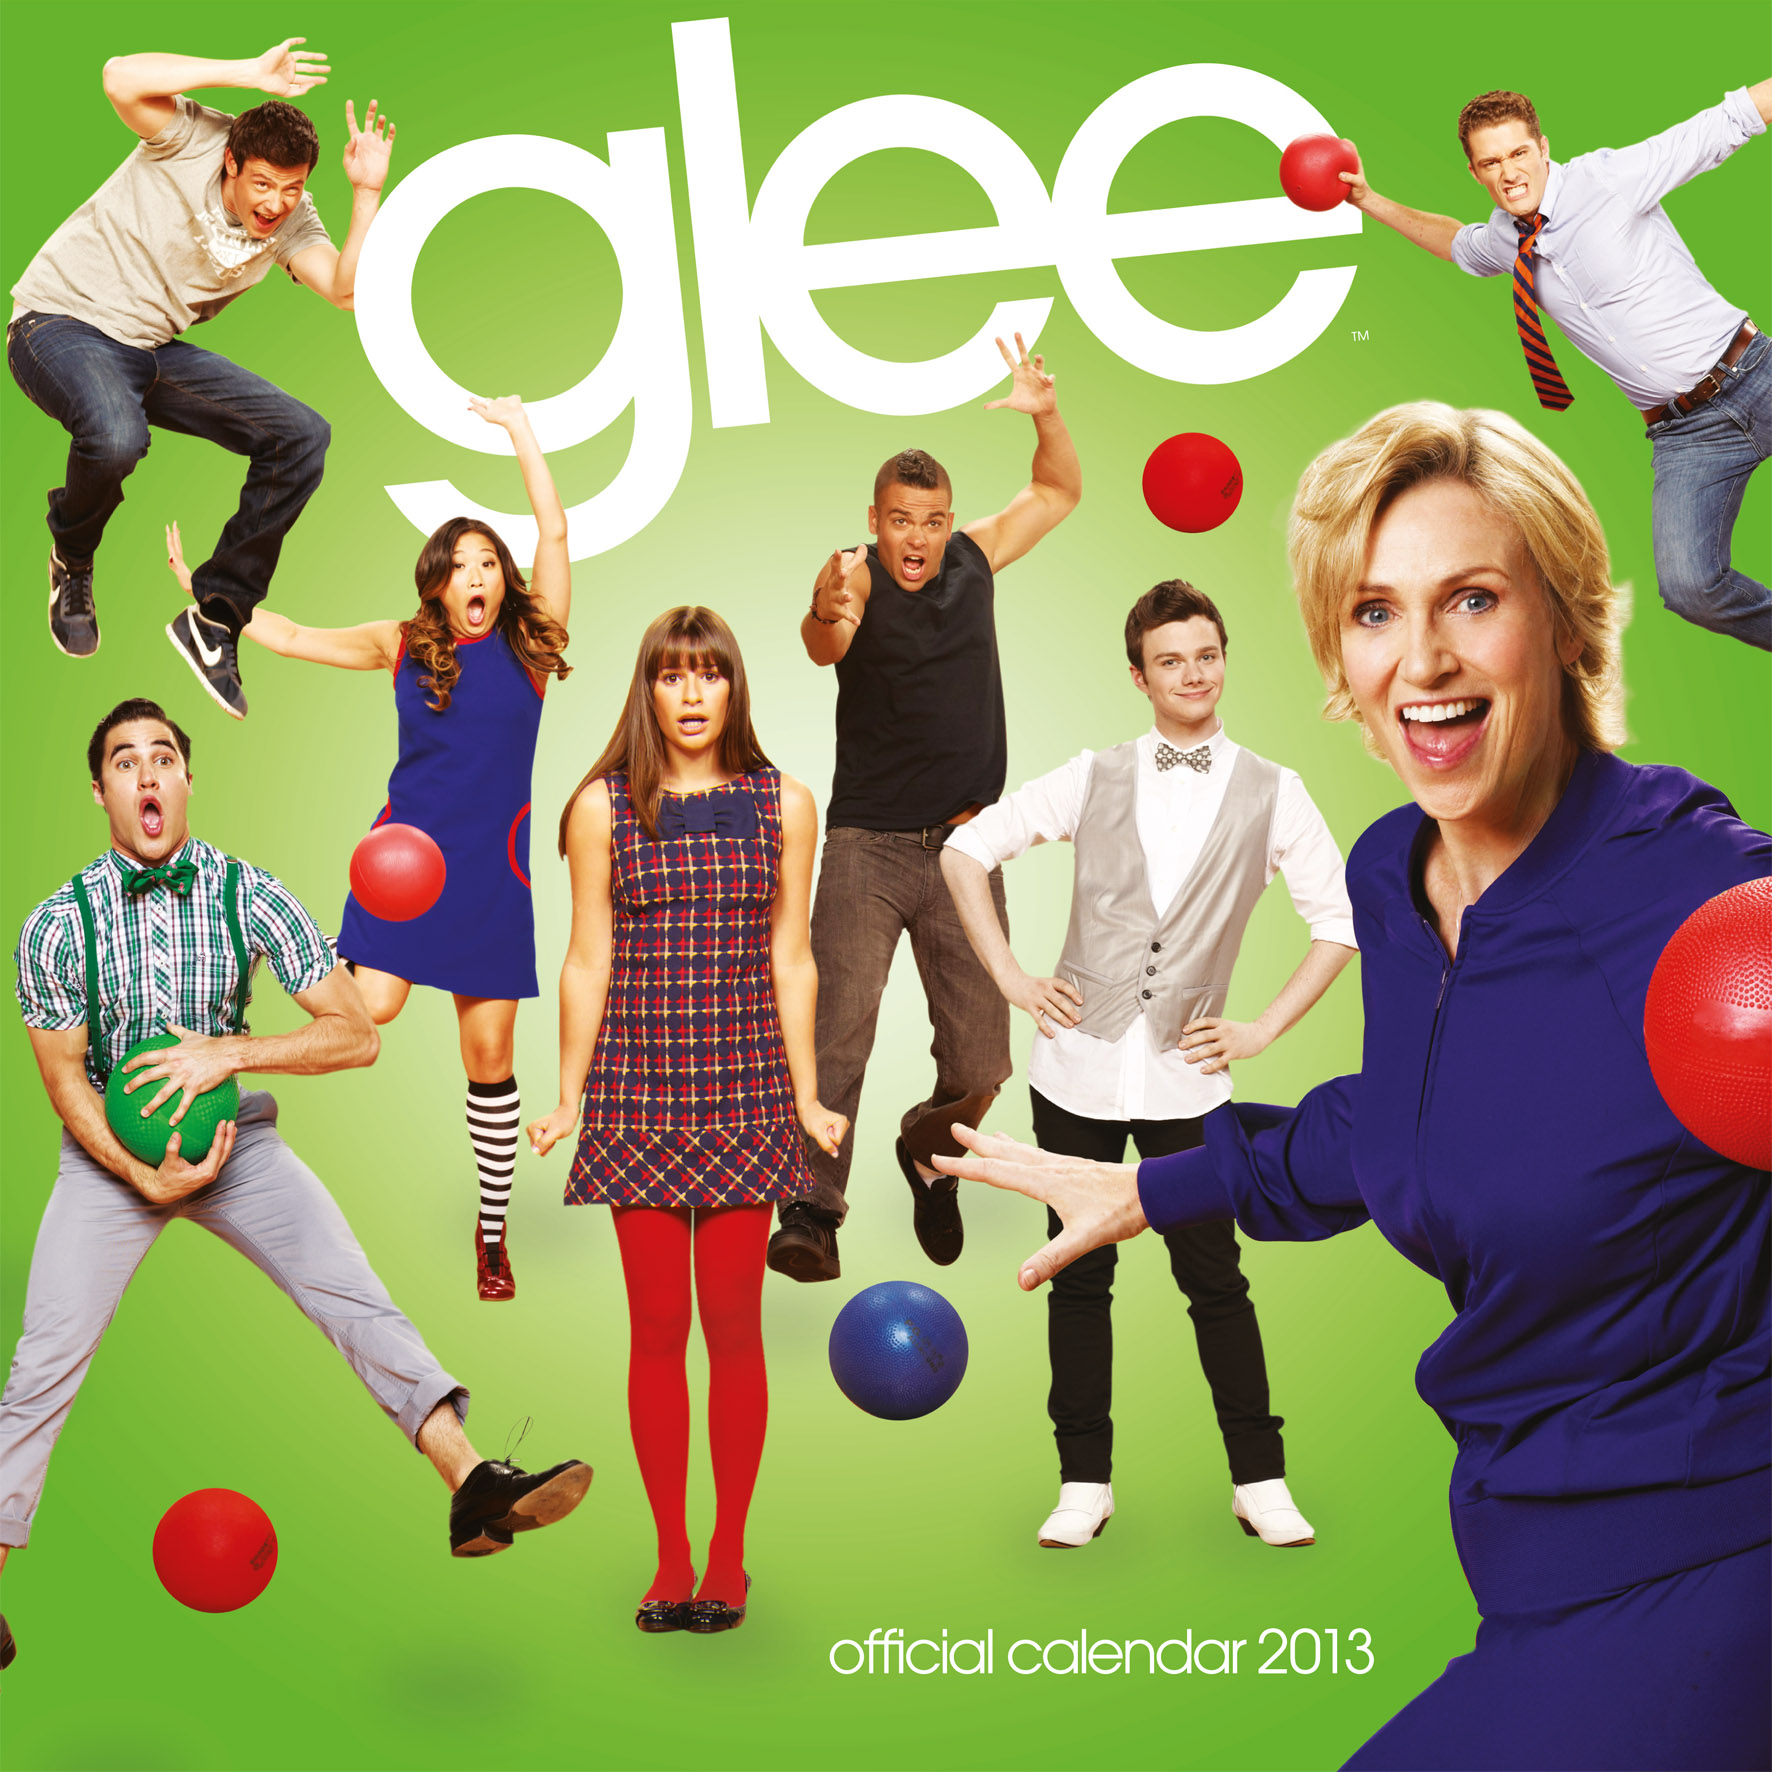 Glee Backgrounds on Wallpapers Vista